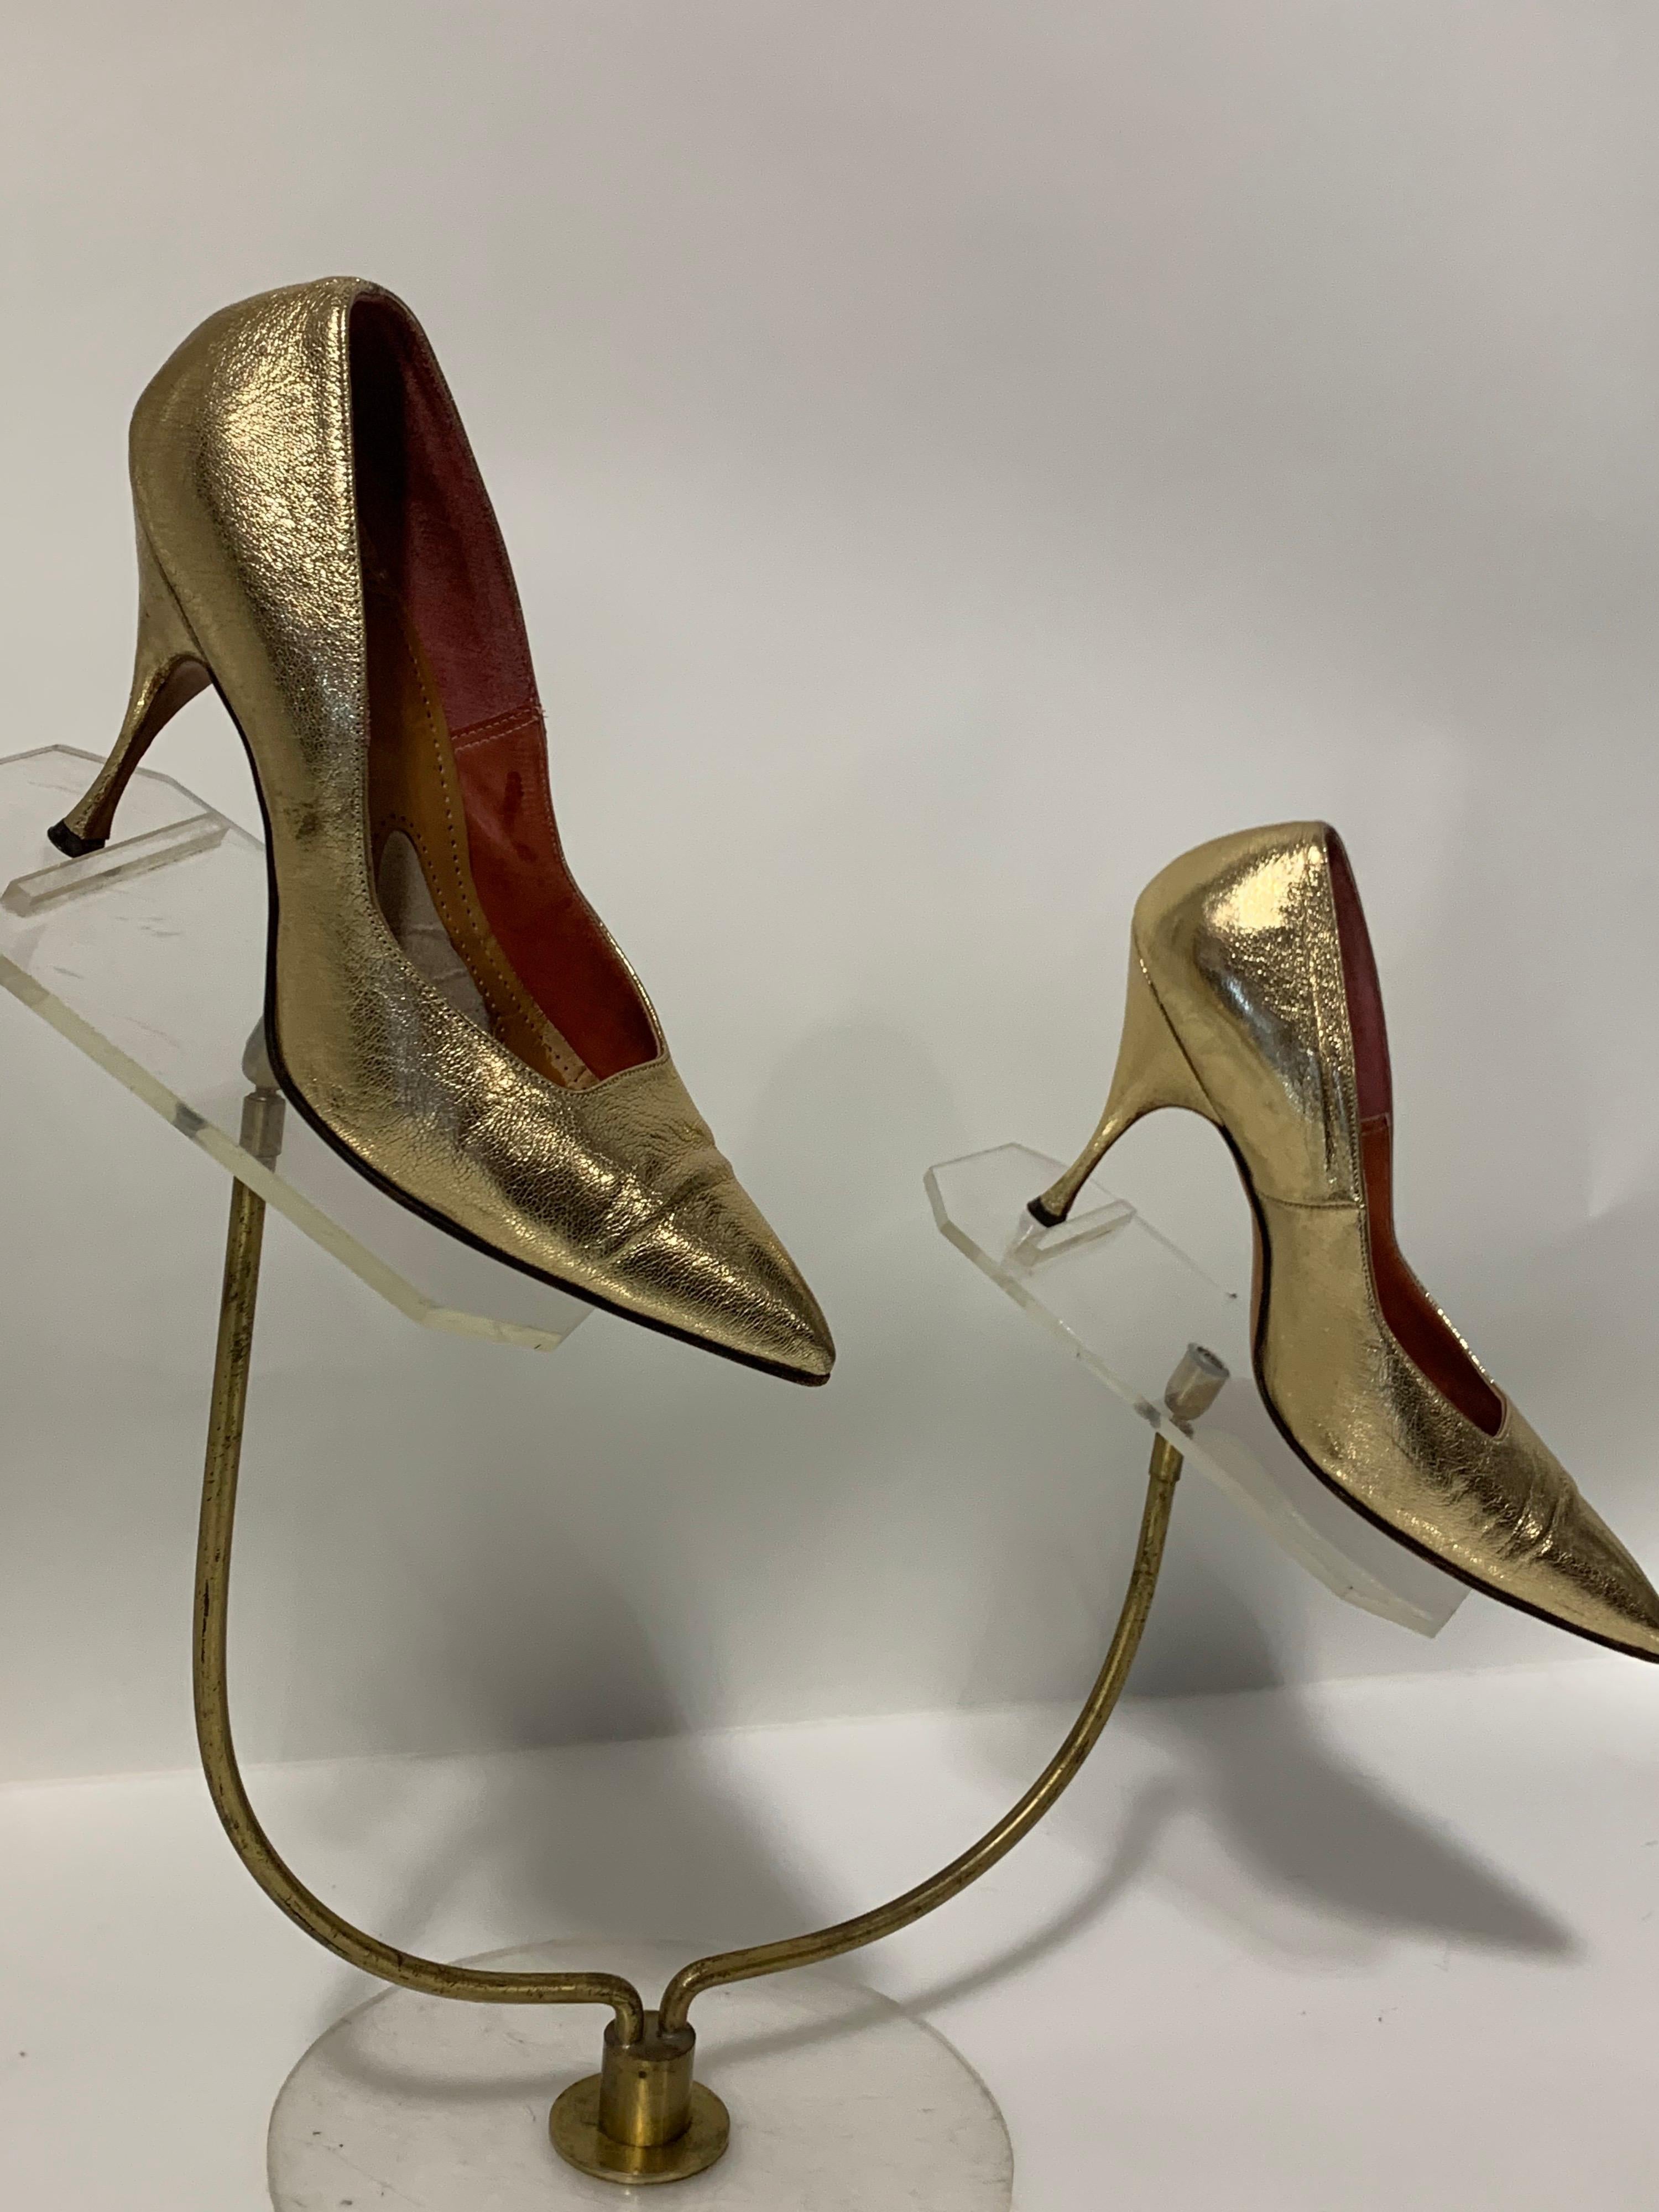 1950s Gold metallic leather stiletto pumps with square cut vamp, pointed toe and leather soles. Made in Germany. Size 7B.